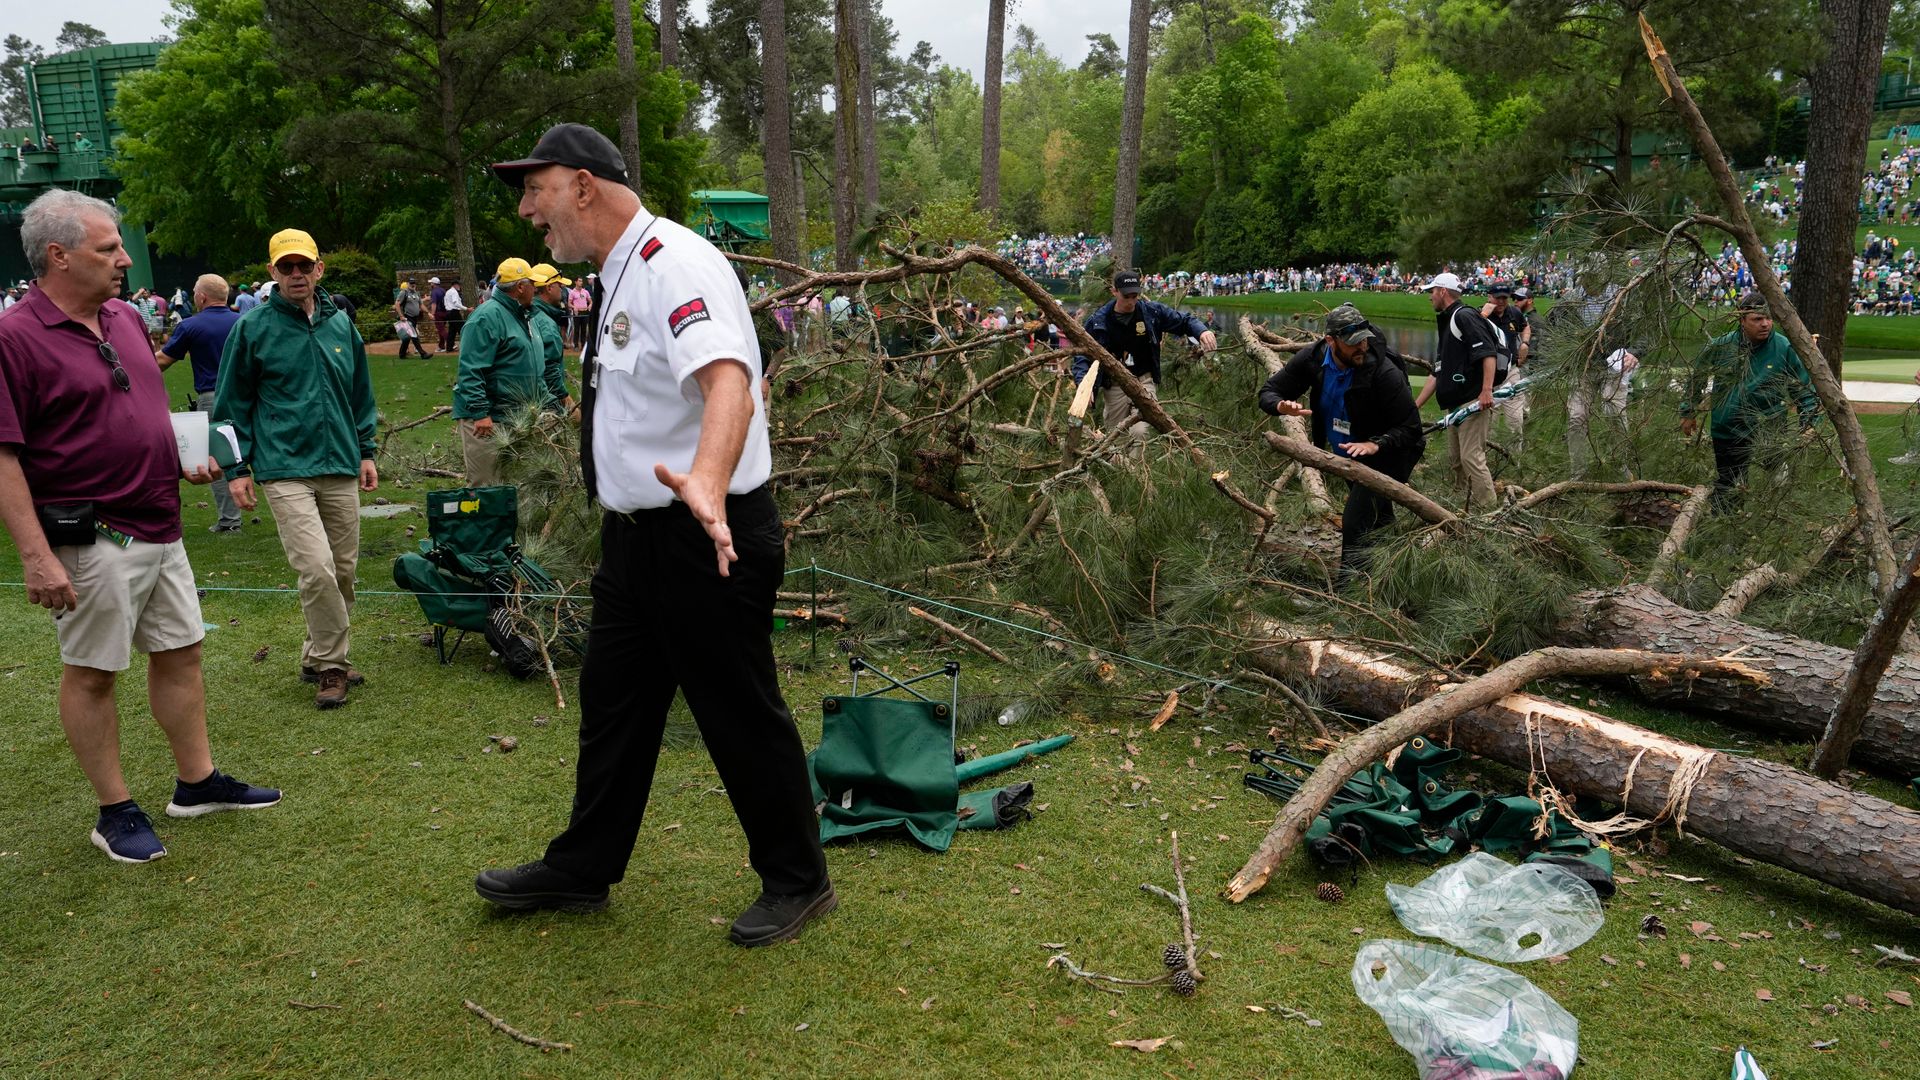 Tree falls at Augusta in high winds | 'Lucky nobody was injured'